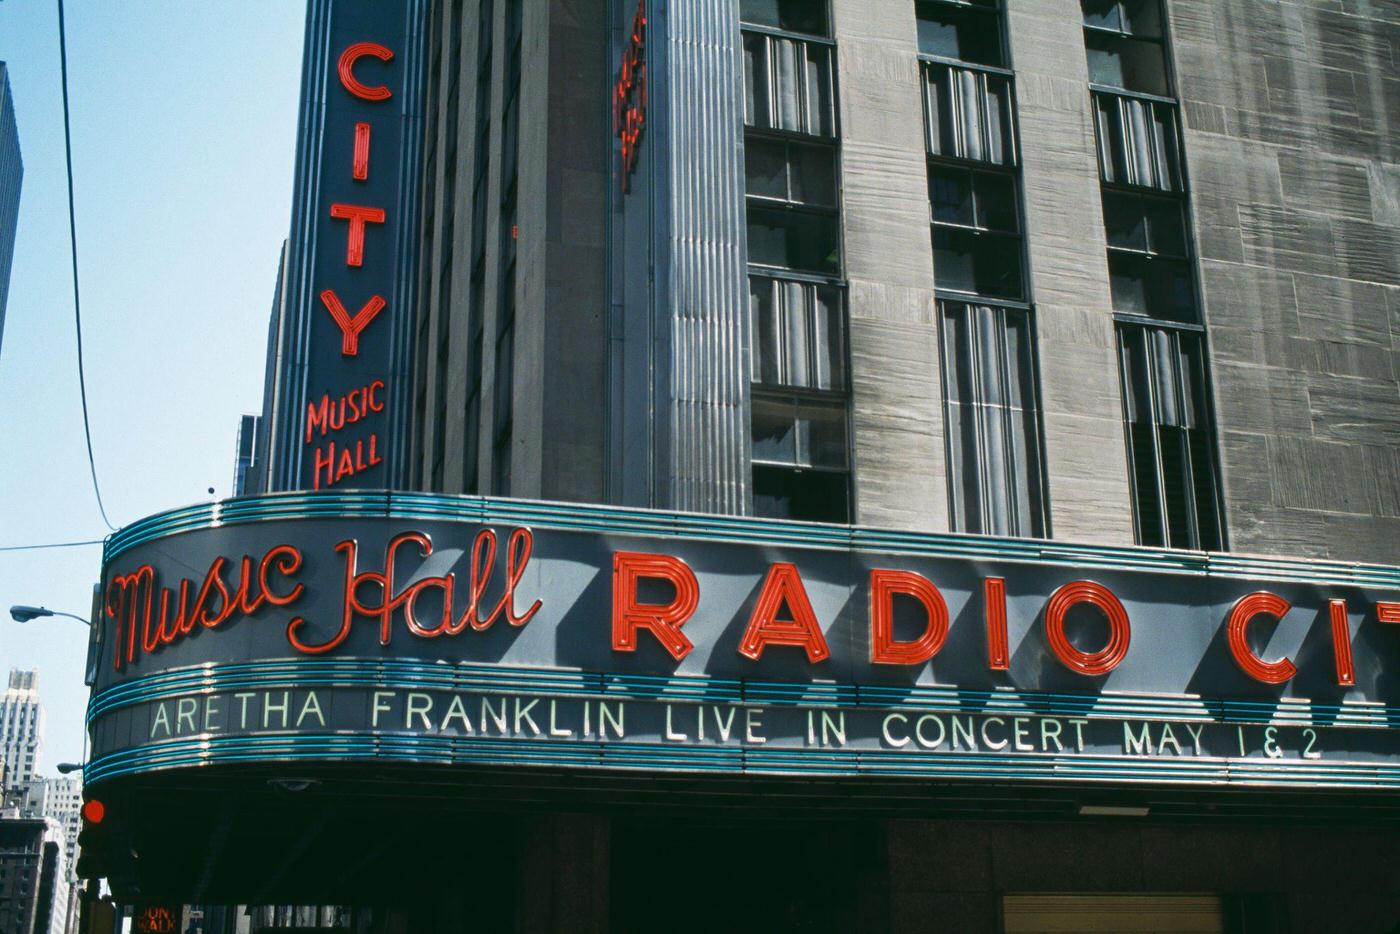 Marquee At Radio City Music Hall Advertising A Live Concert By Aretha Franklin, Manhattan, 1993